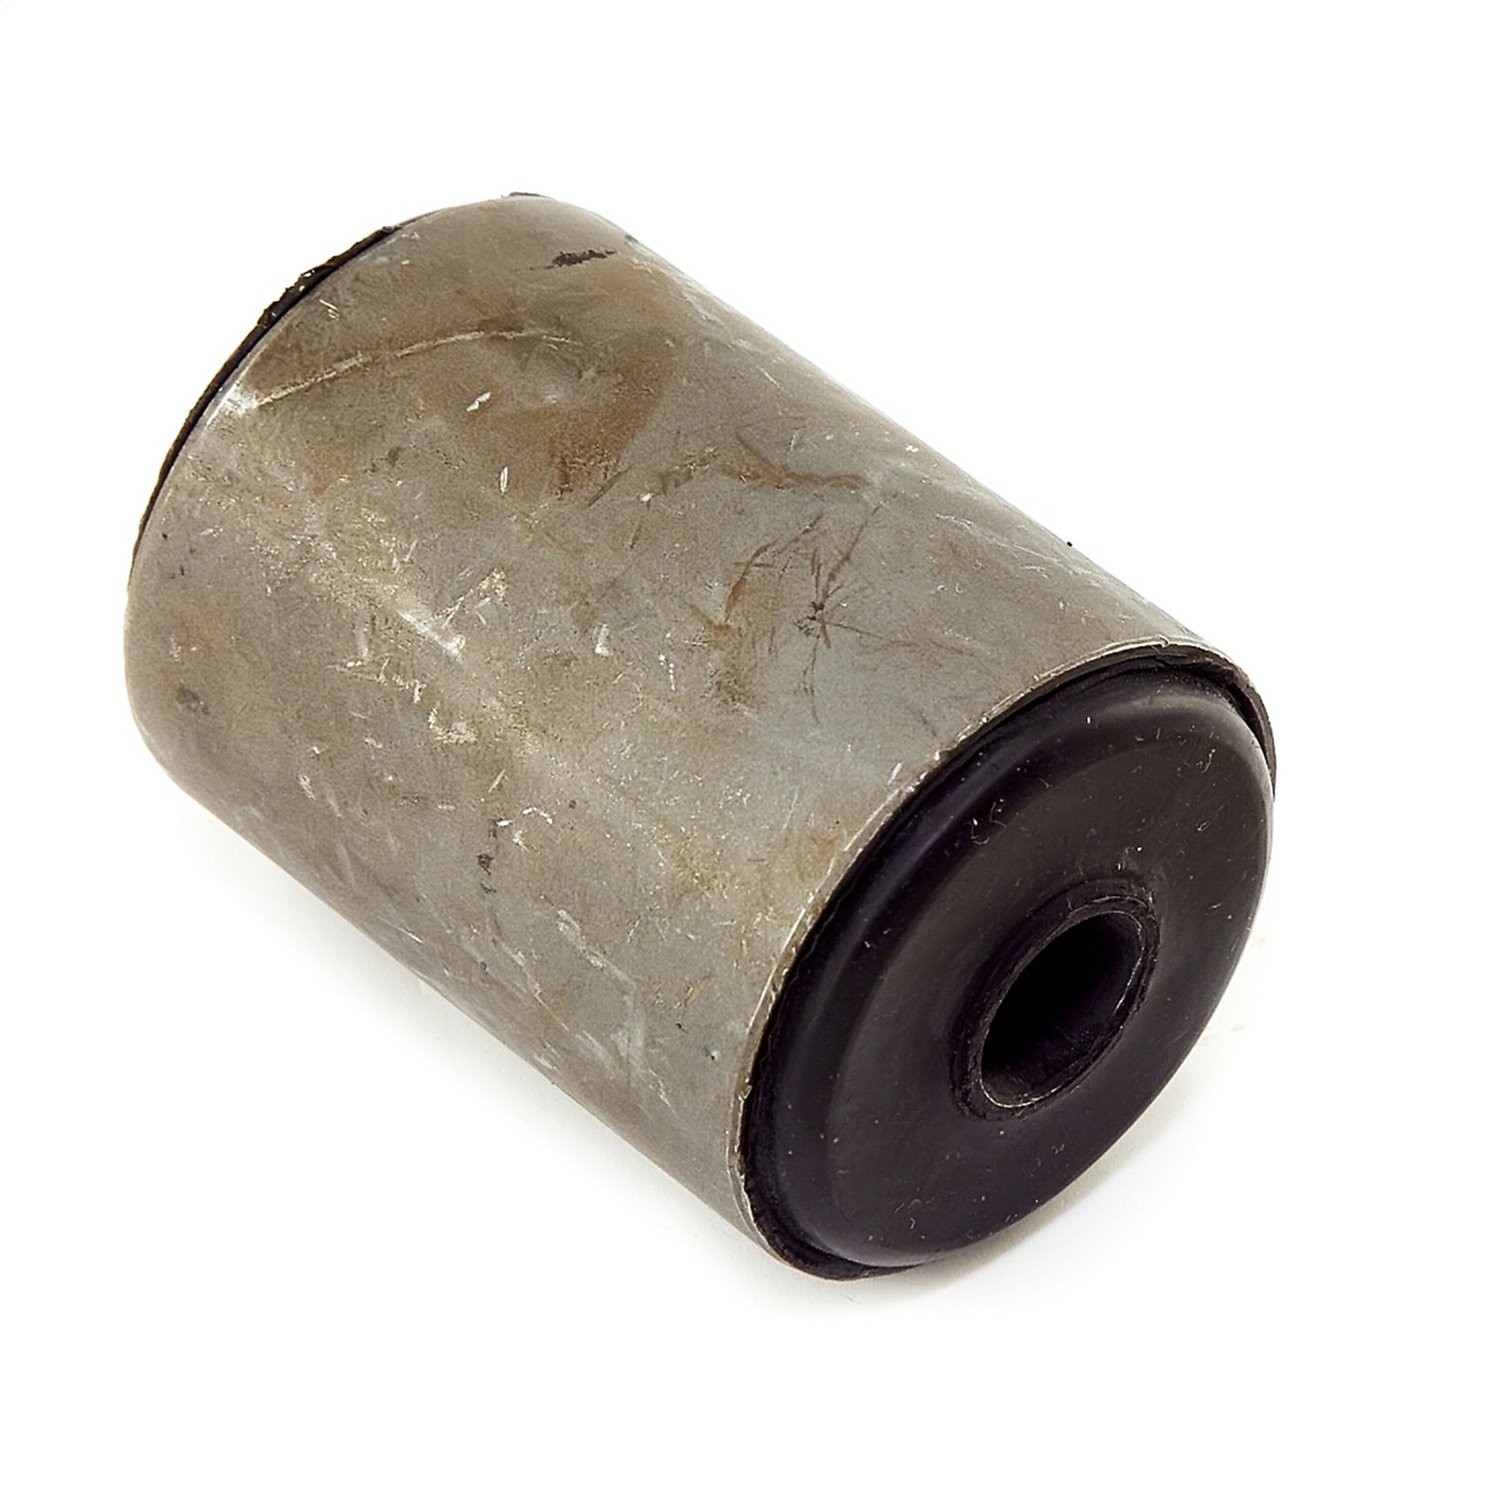 Replacement front leaf spring bushing from Omix-ADA, Fits 78-91 Jeep SJ and J-Series models